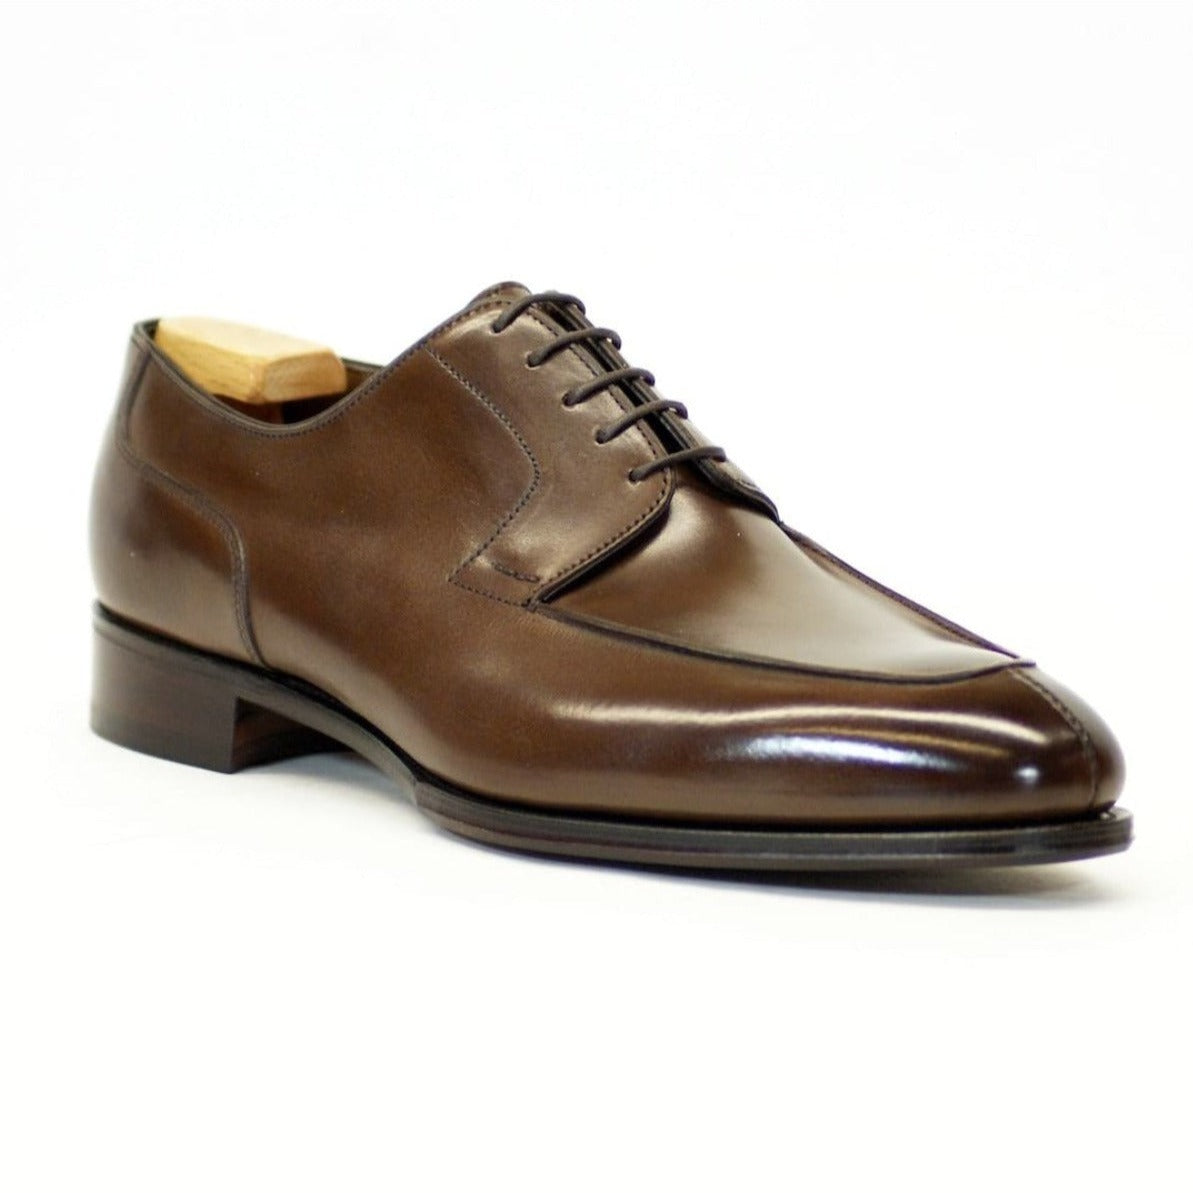 Charlton in Espresso Calf – Paul Sargent Shoes Limited